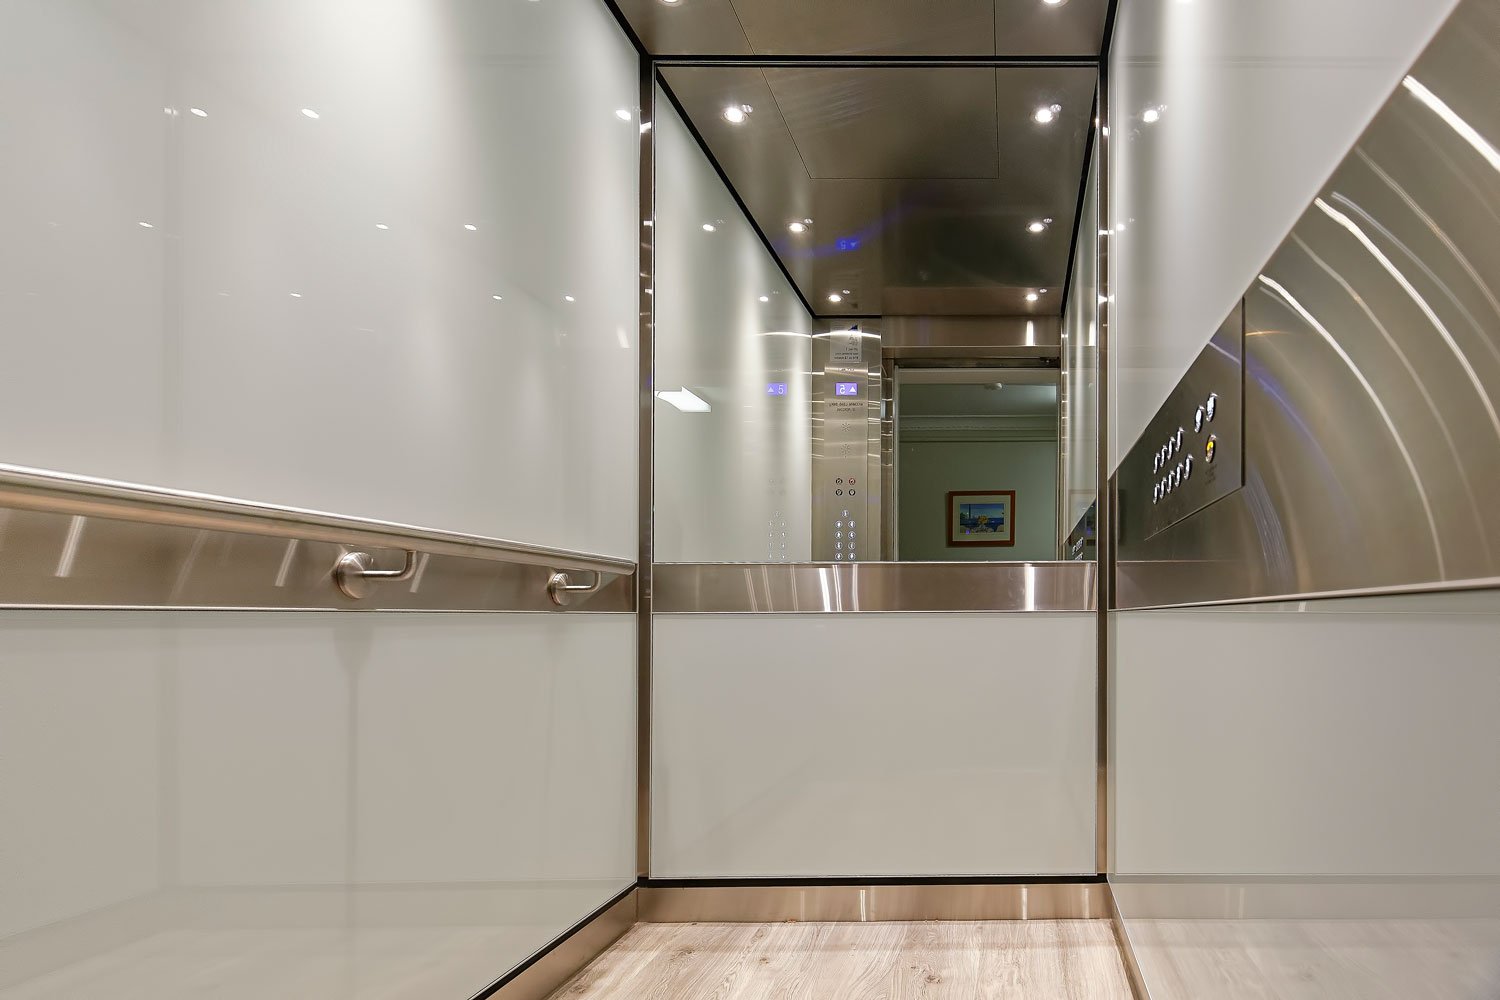  Sleek and modern elevator with white and mirror interior 